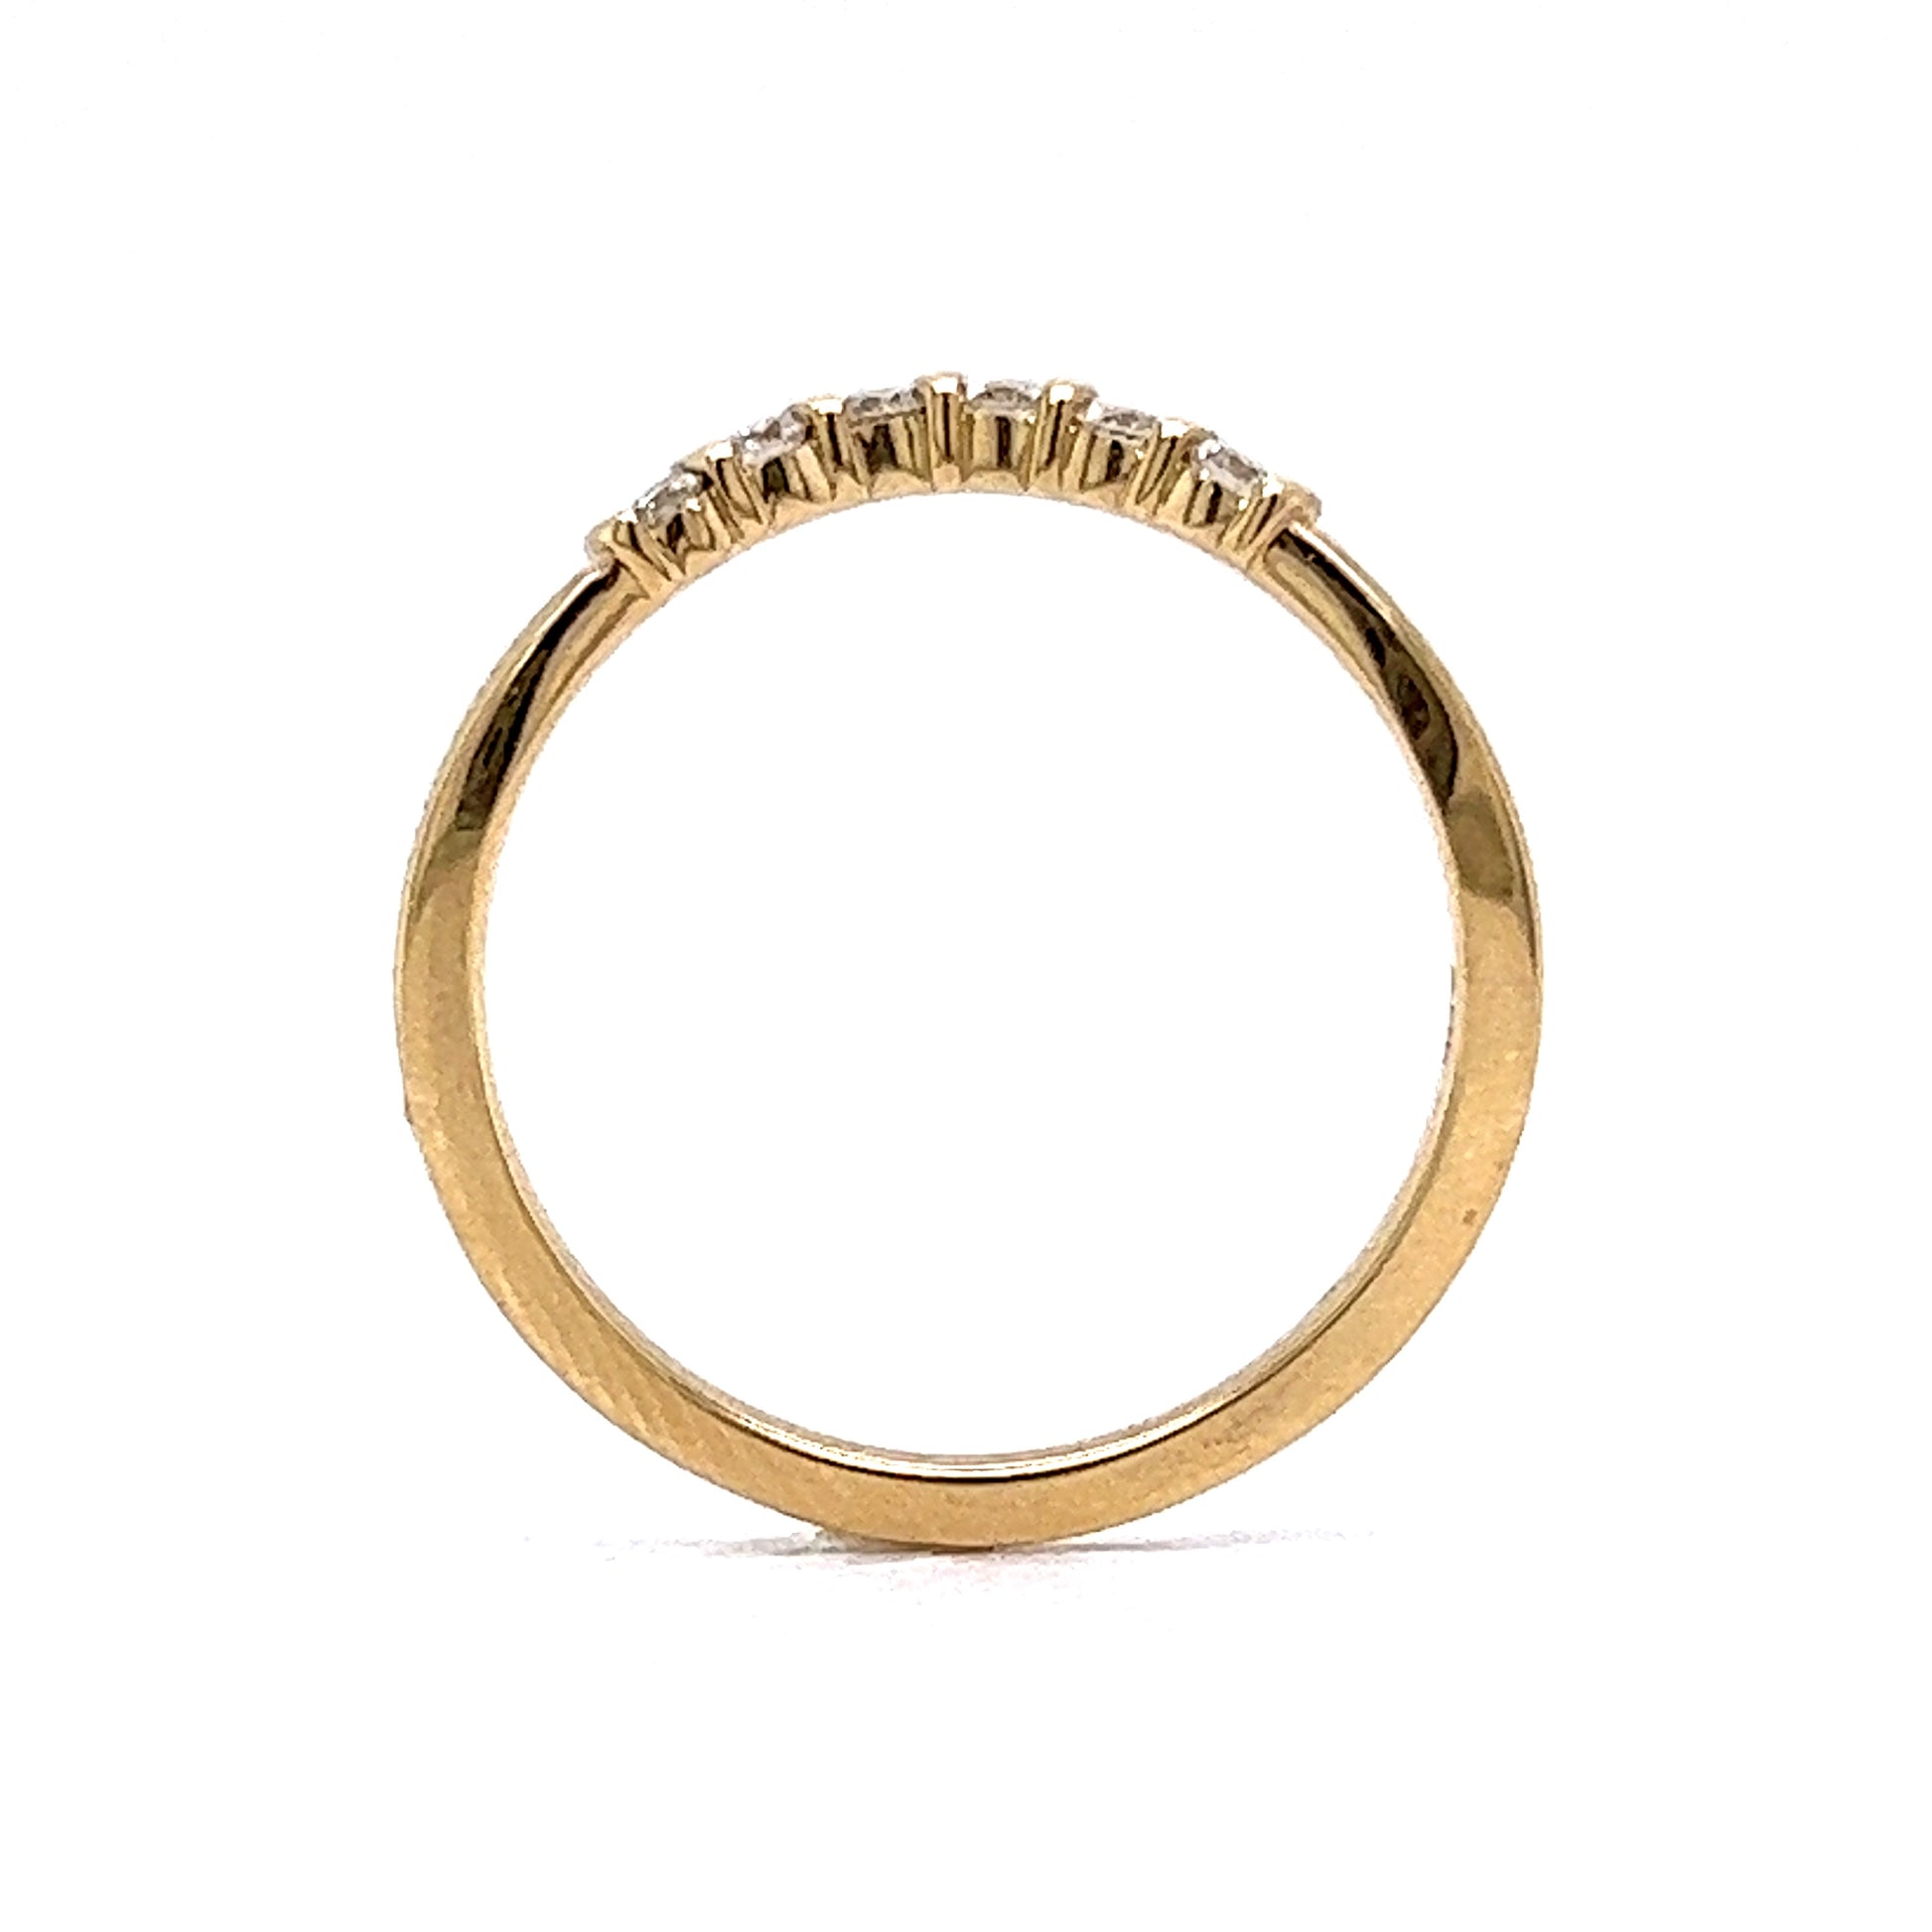 .18 Round Diamond Contoured Wedding Band in Yellow GoldComposition: 14 Karat Yellow Gold Ring Size: 7.0 Total Diamond Weight: .18ct Total Gram Weight: 2.0 g Inscription: 14k
      